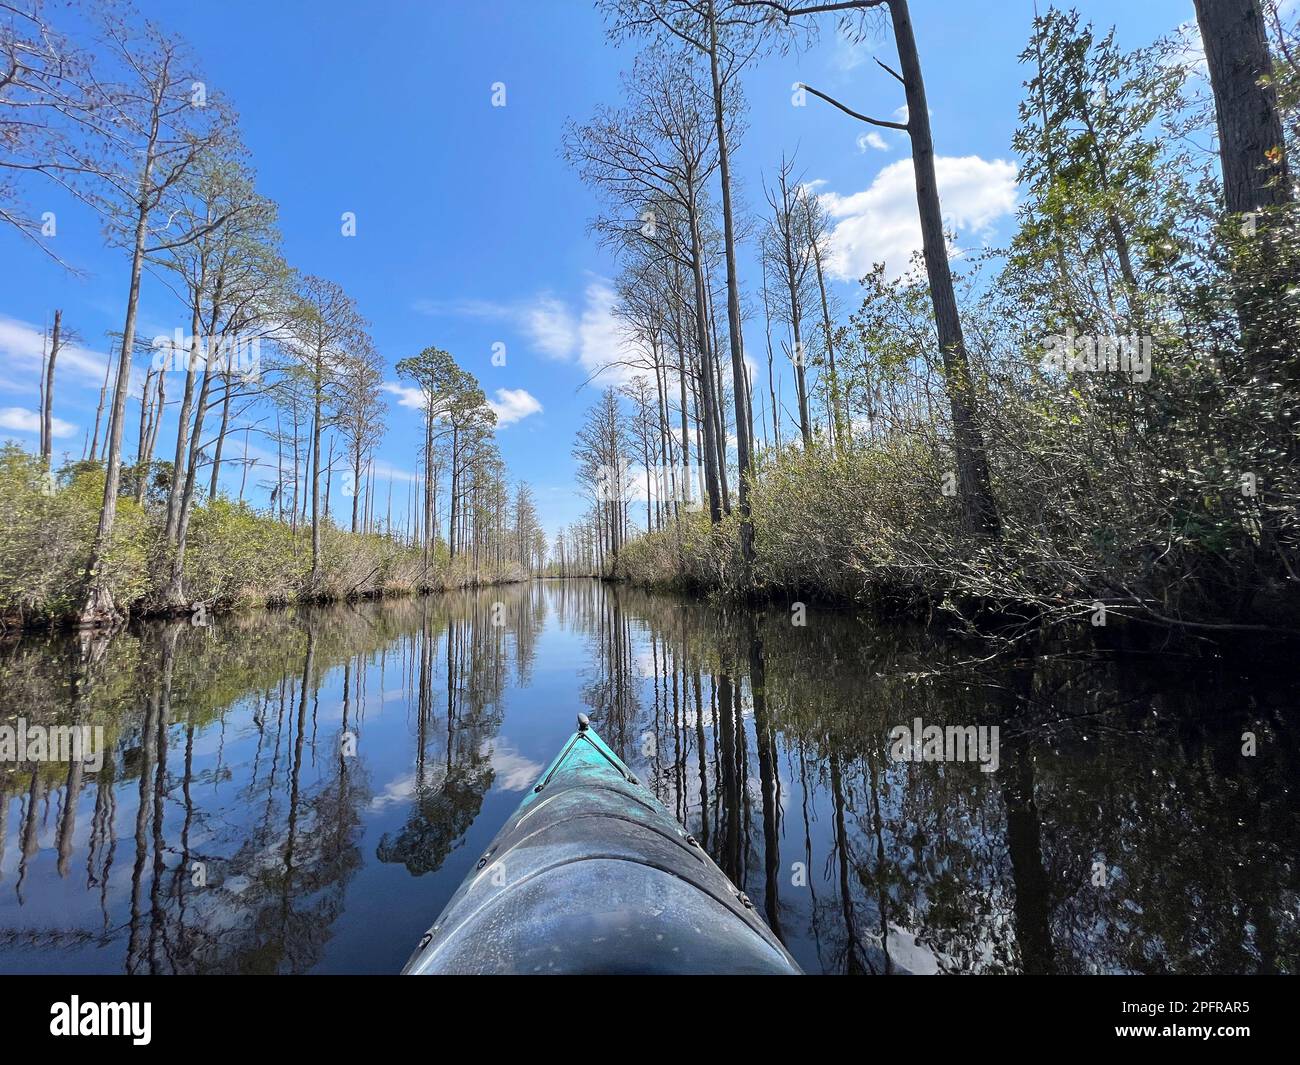 A kayaker enjoys the scenery in Okefenokee swamp, a National Wildlife Refuge straddling Florida and Georgia in the southern United States. Stock Photo